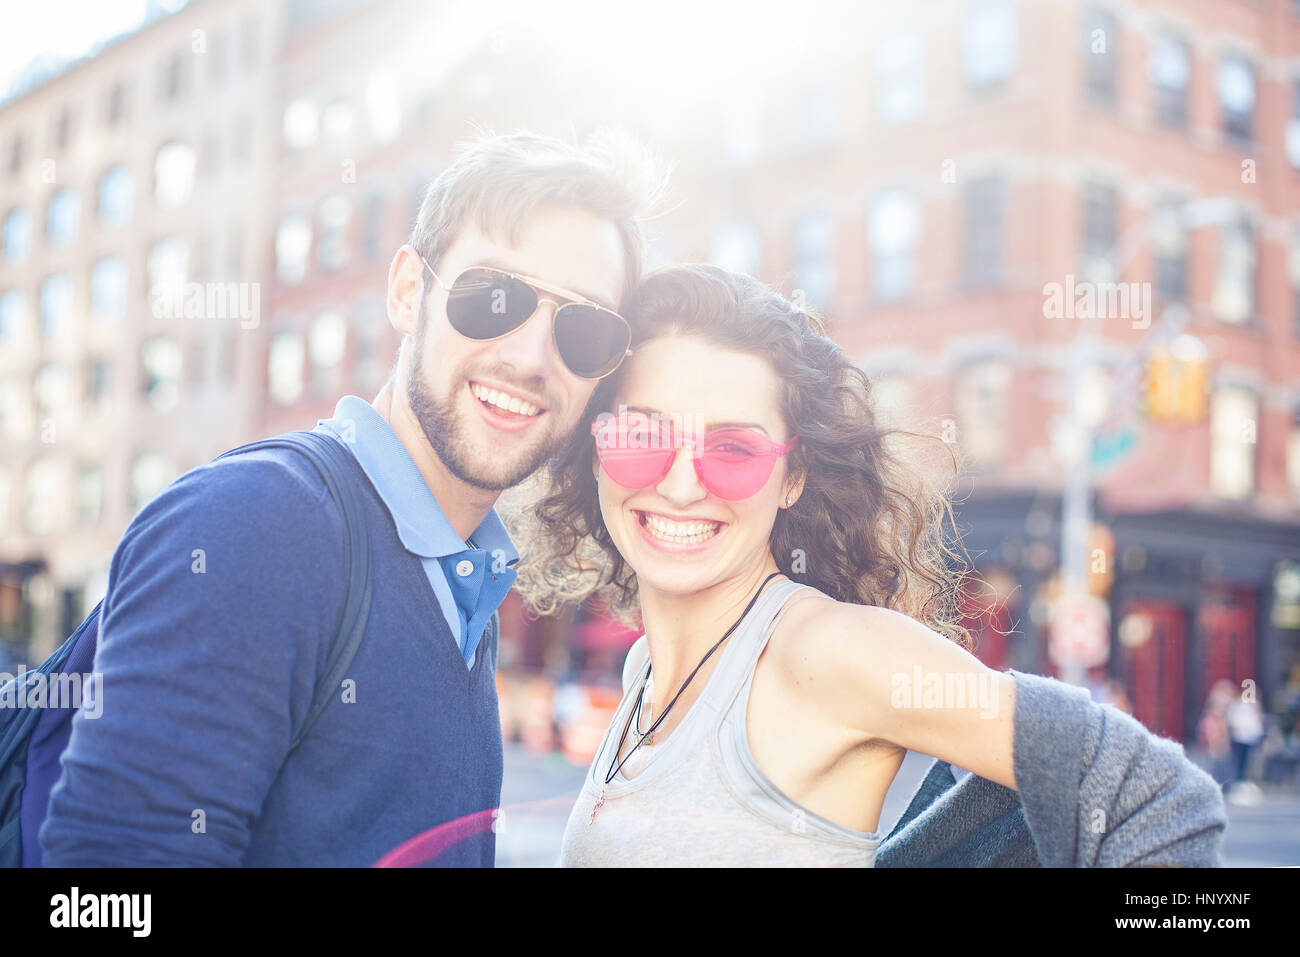 Young couple smiling together in urban setting, portrait Stock Photo